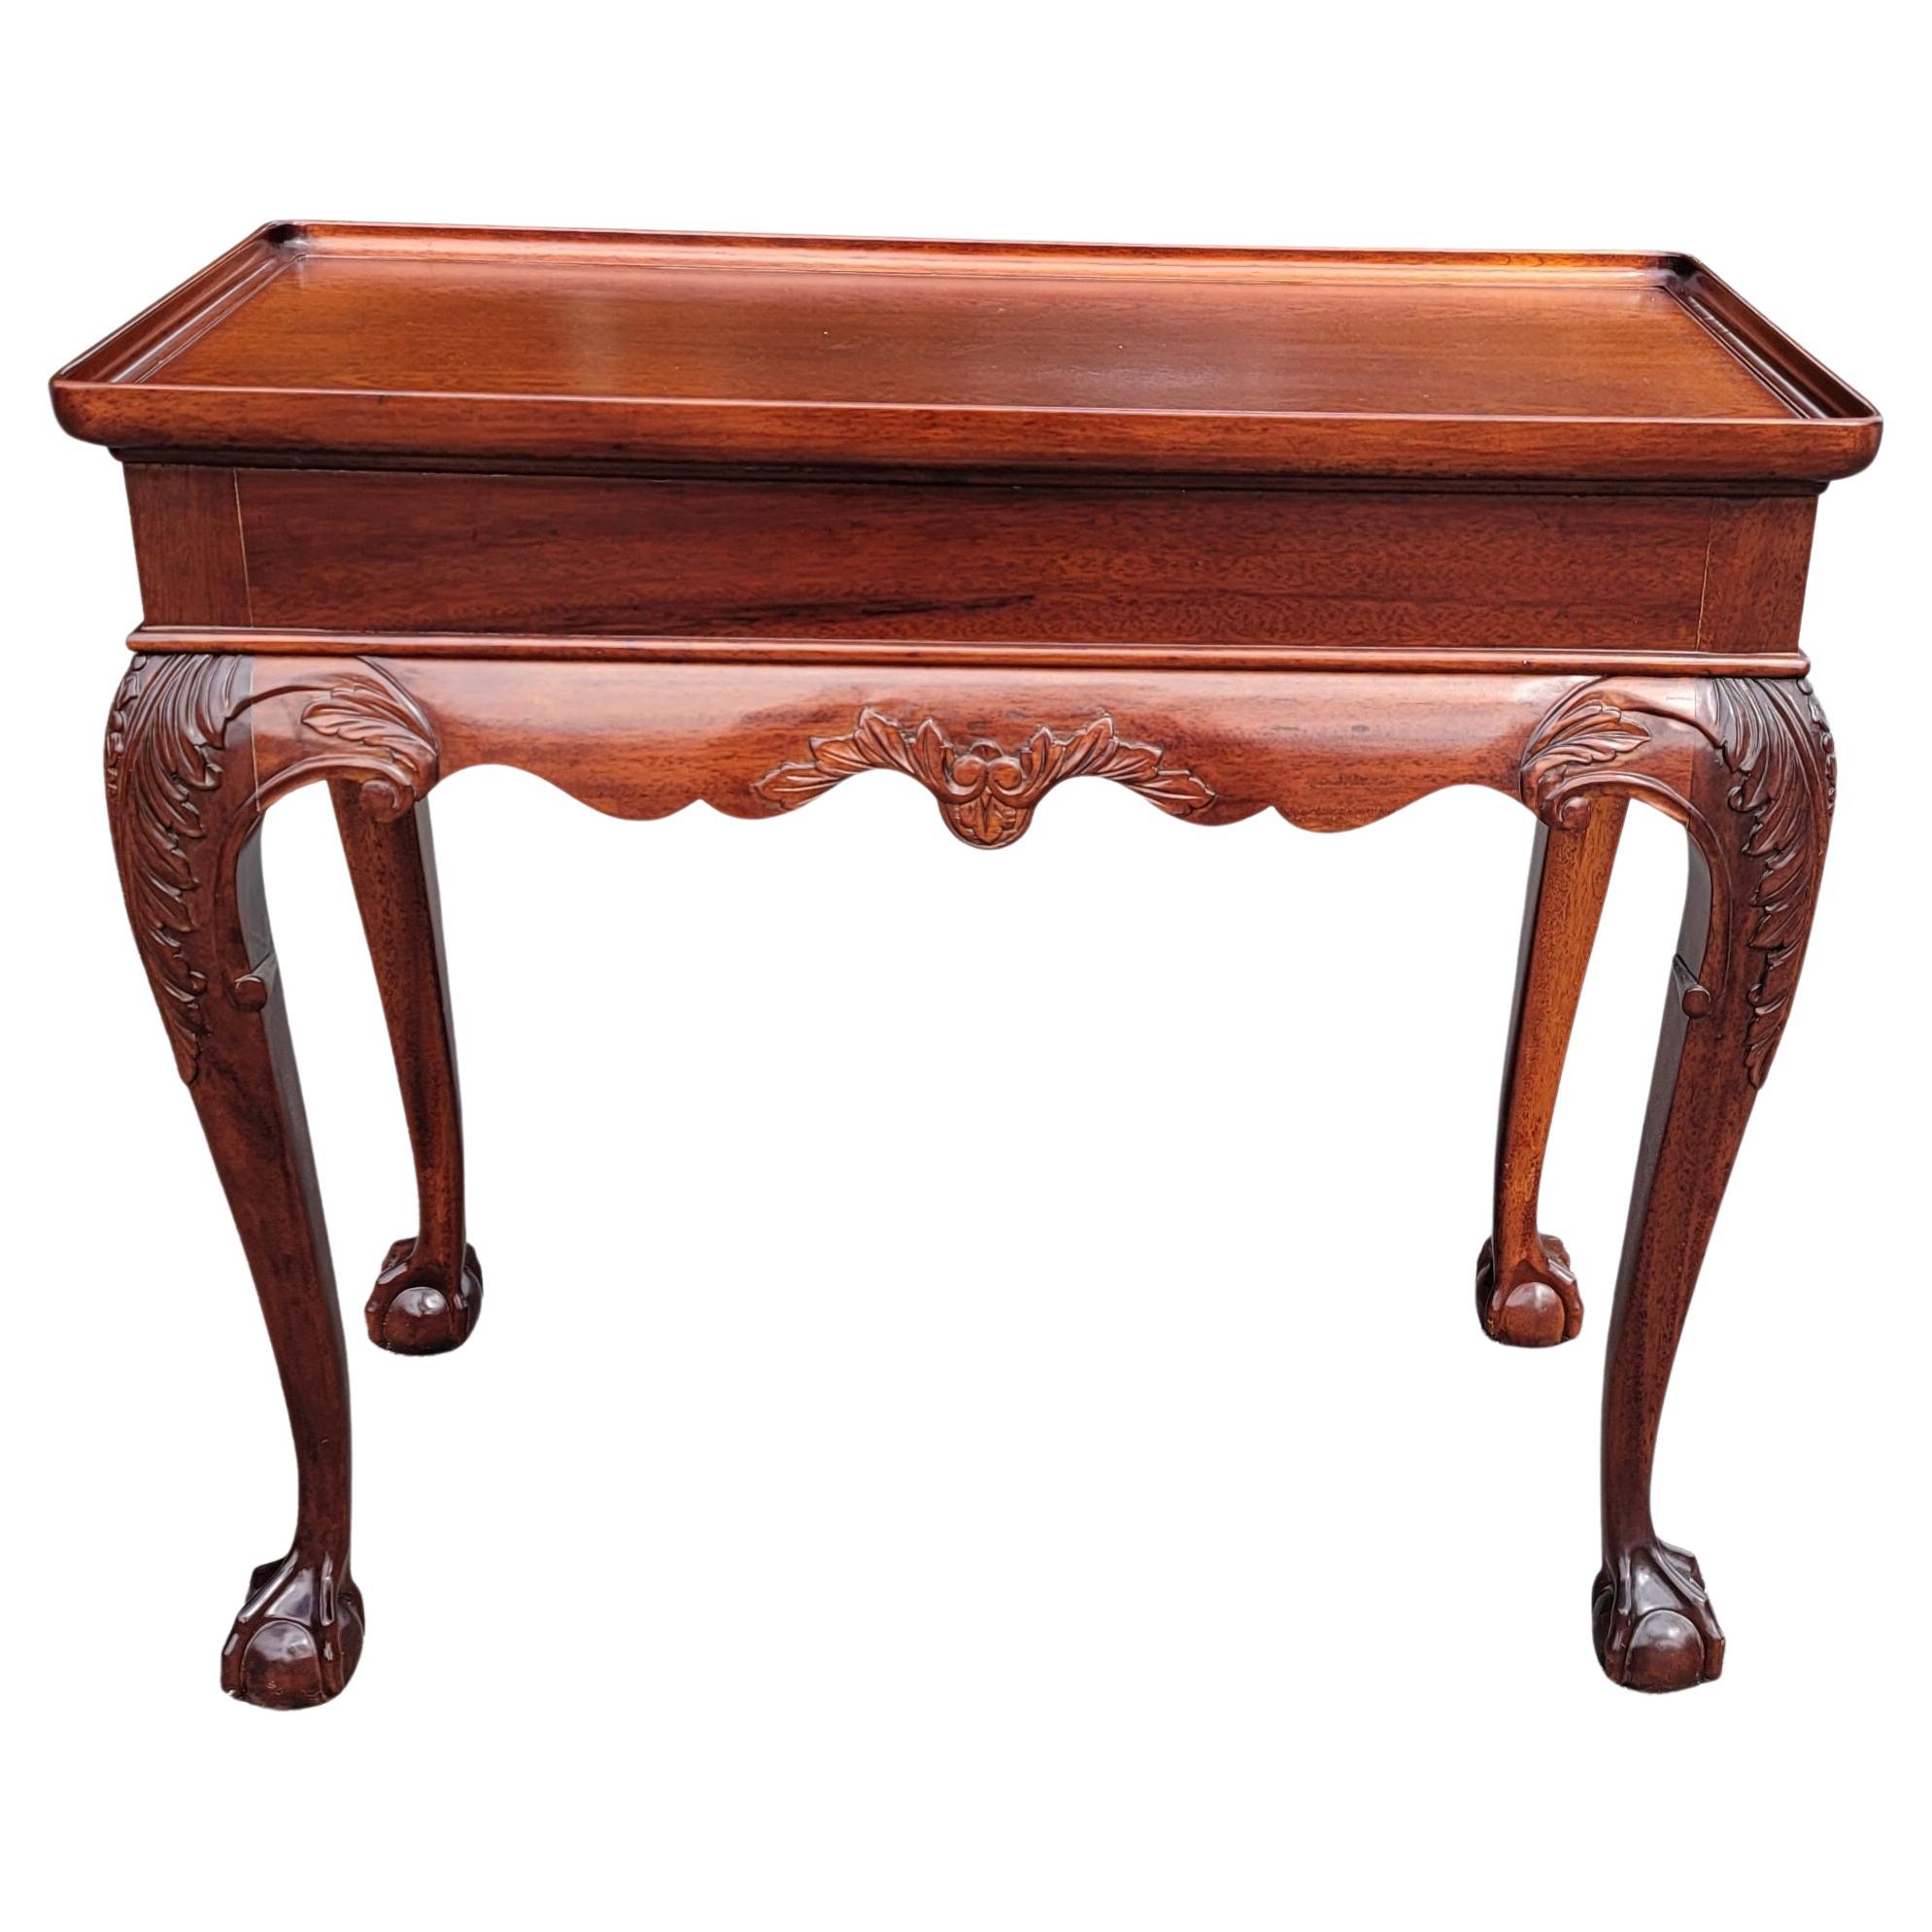 Ball & Claw Chippendale Mahogany Server Console  with Gallery and Pull-out Trays For Sale 2